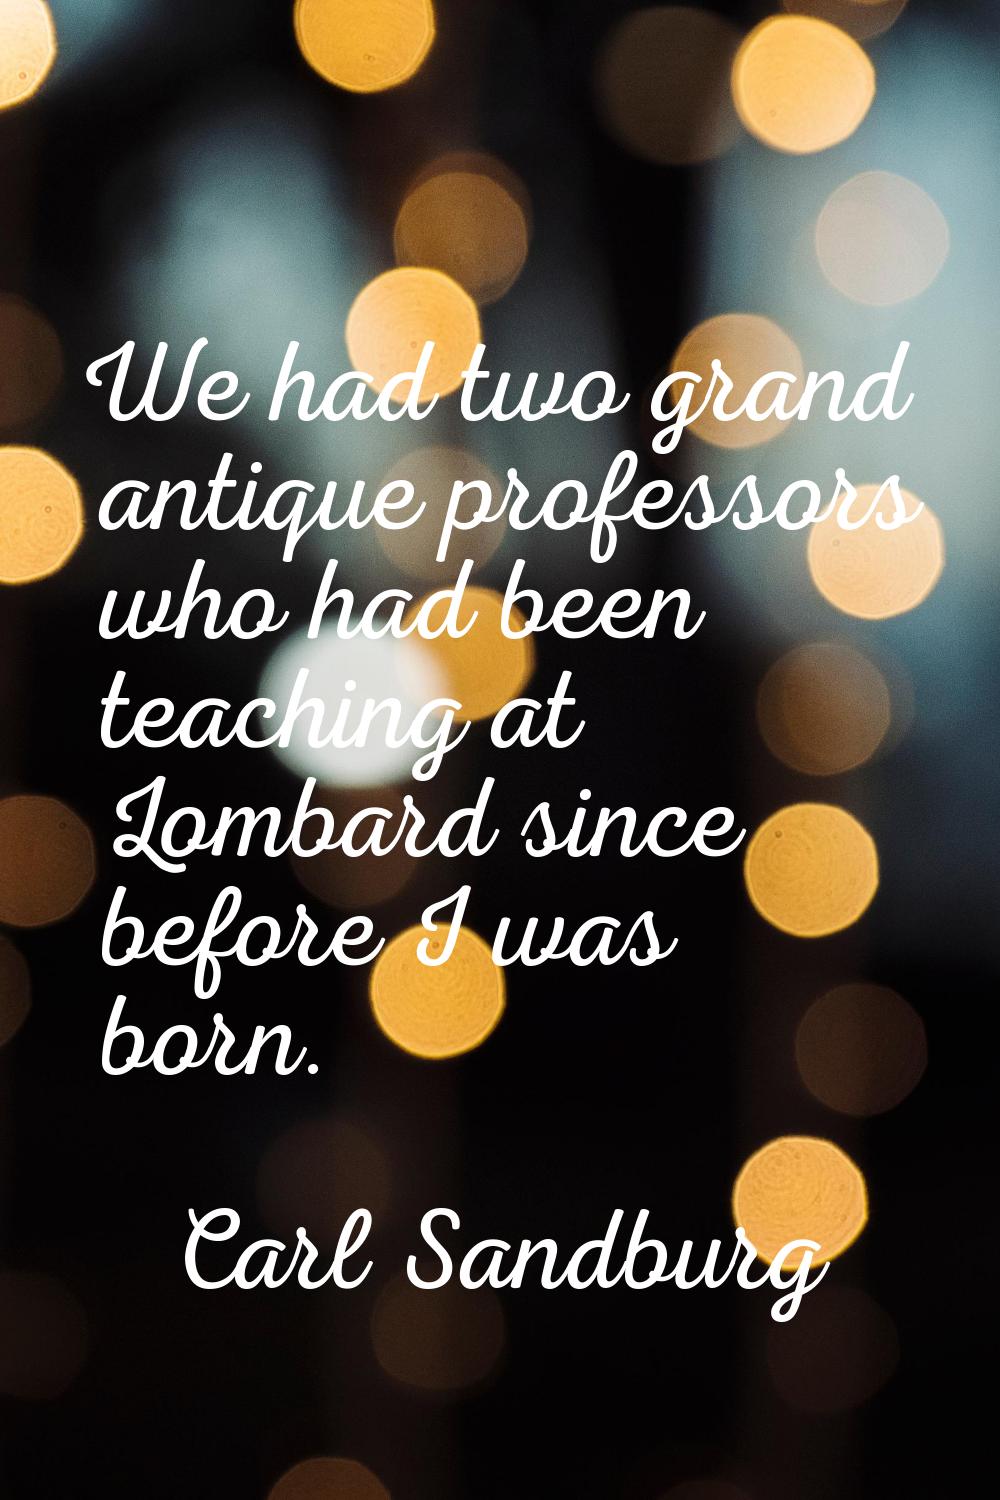 We had two grand antique professors who had been teaching at Lombard since before I was born.